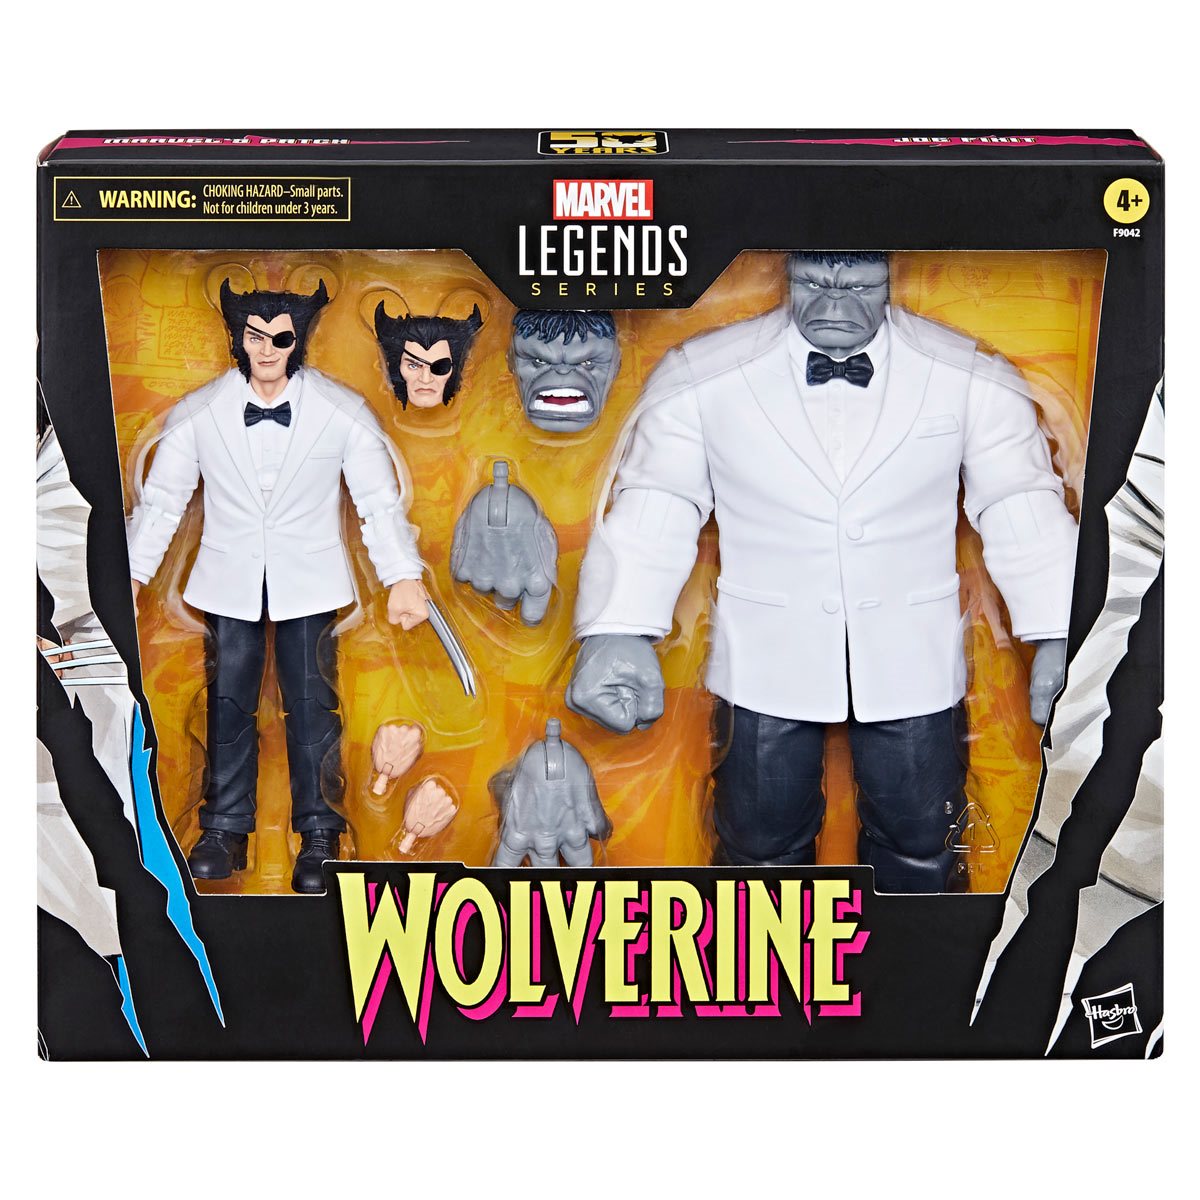 Marvel Legends Wolverine 50 Years Patch and Joe Fixit Two-Pack Hasbro